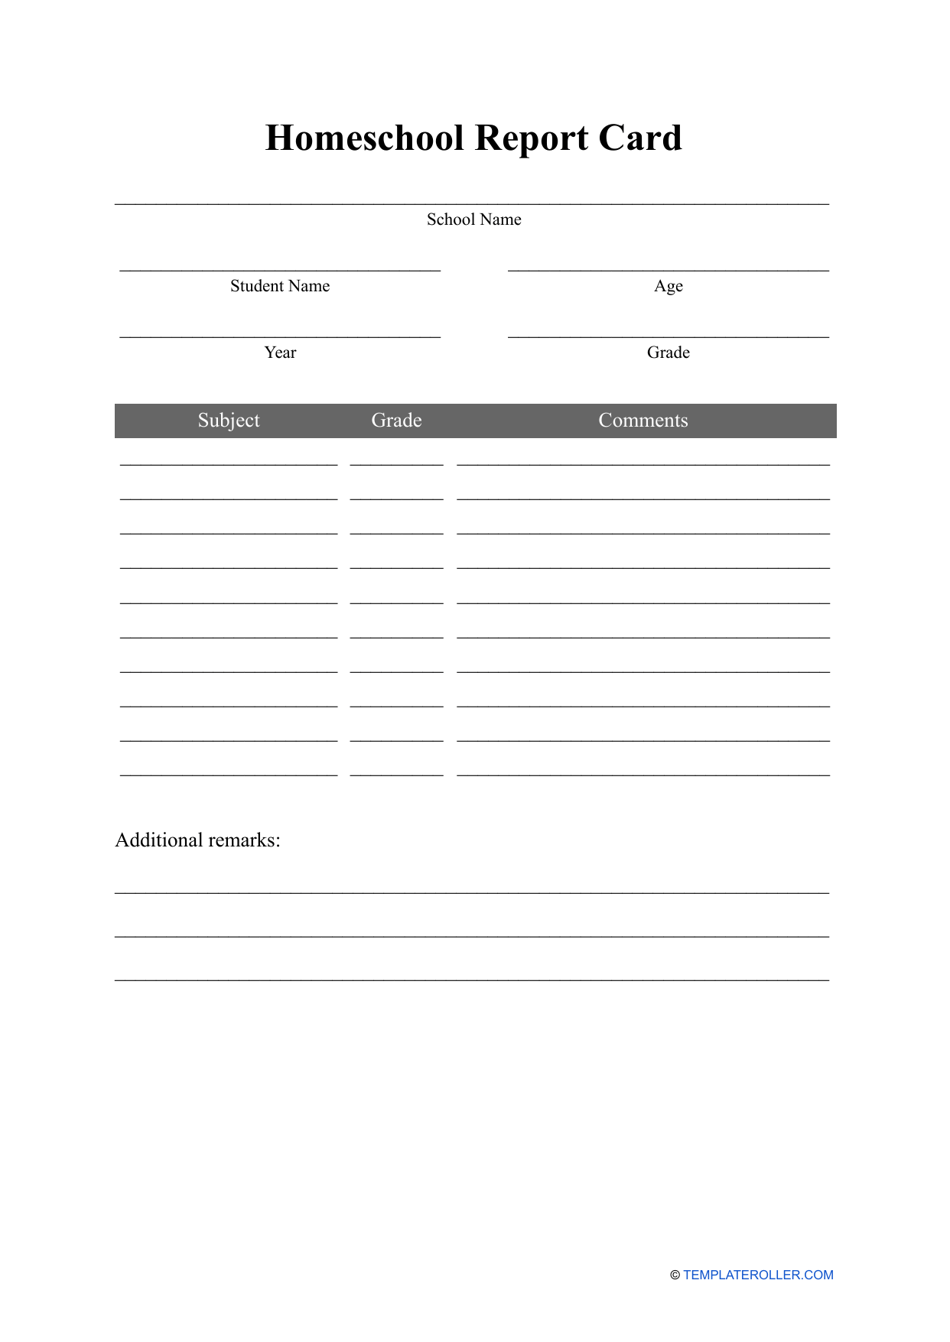 Homeschool Report Card Template, Page 1